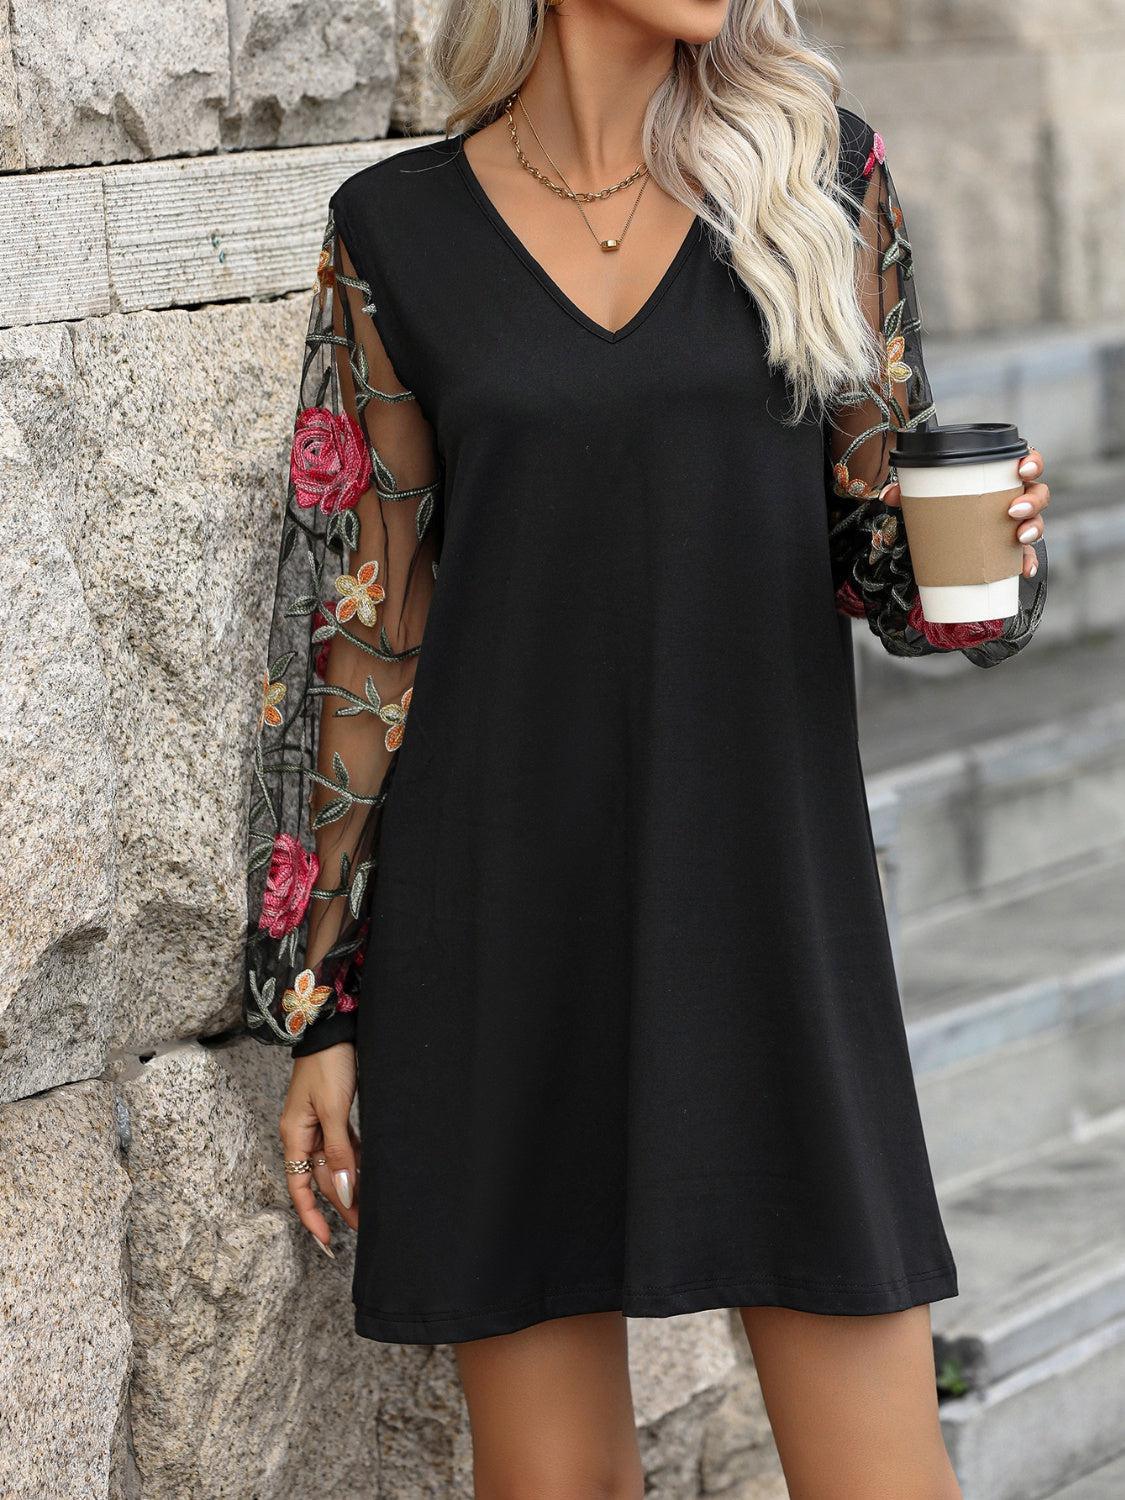 a woman holding a cup of coffee standing next to a stone wall